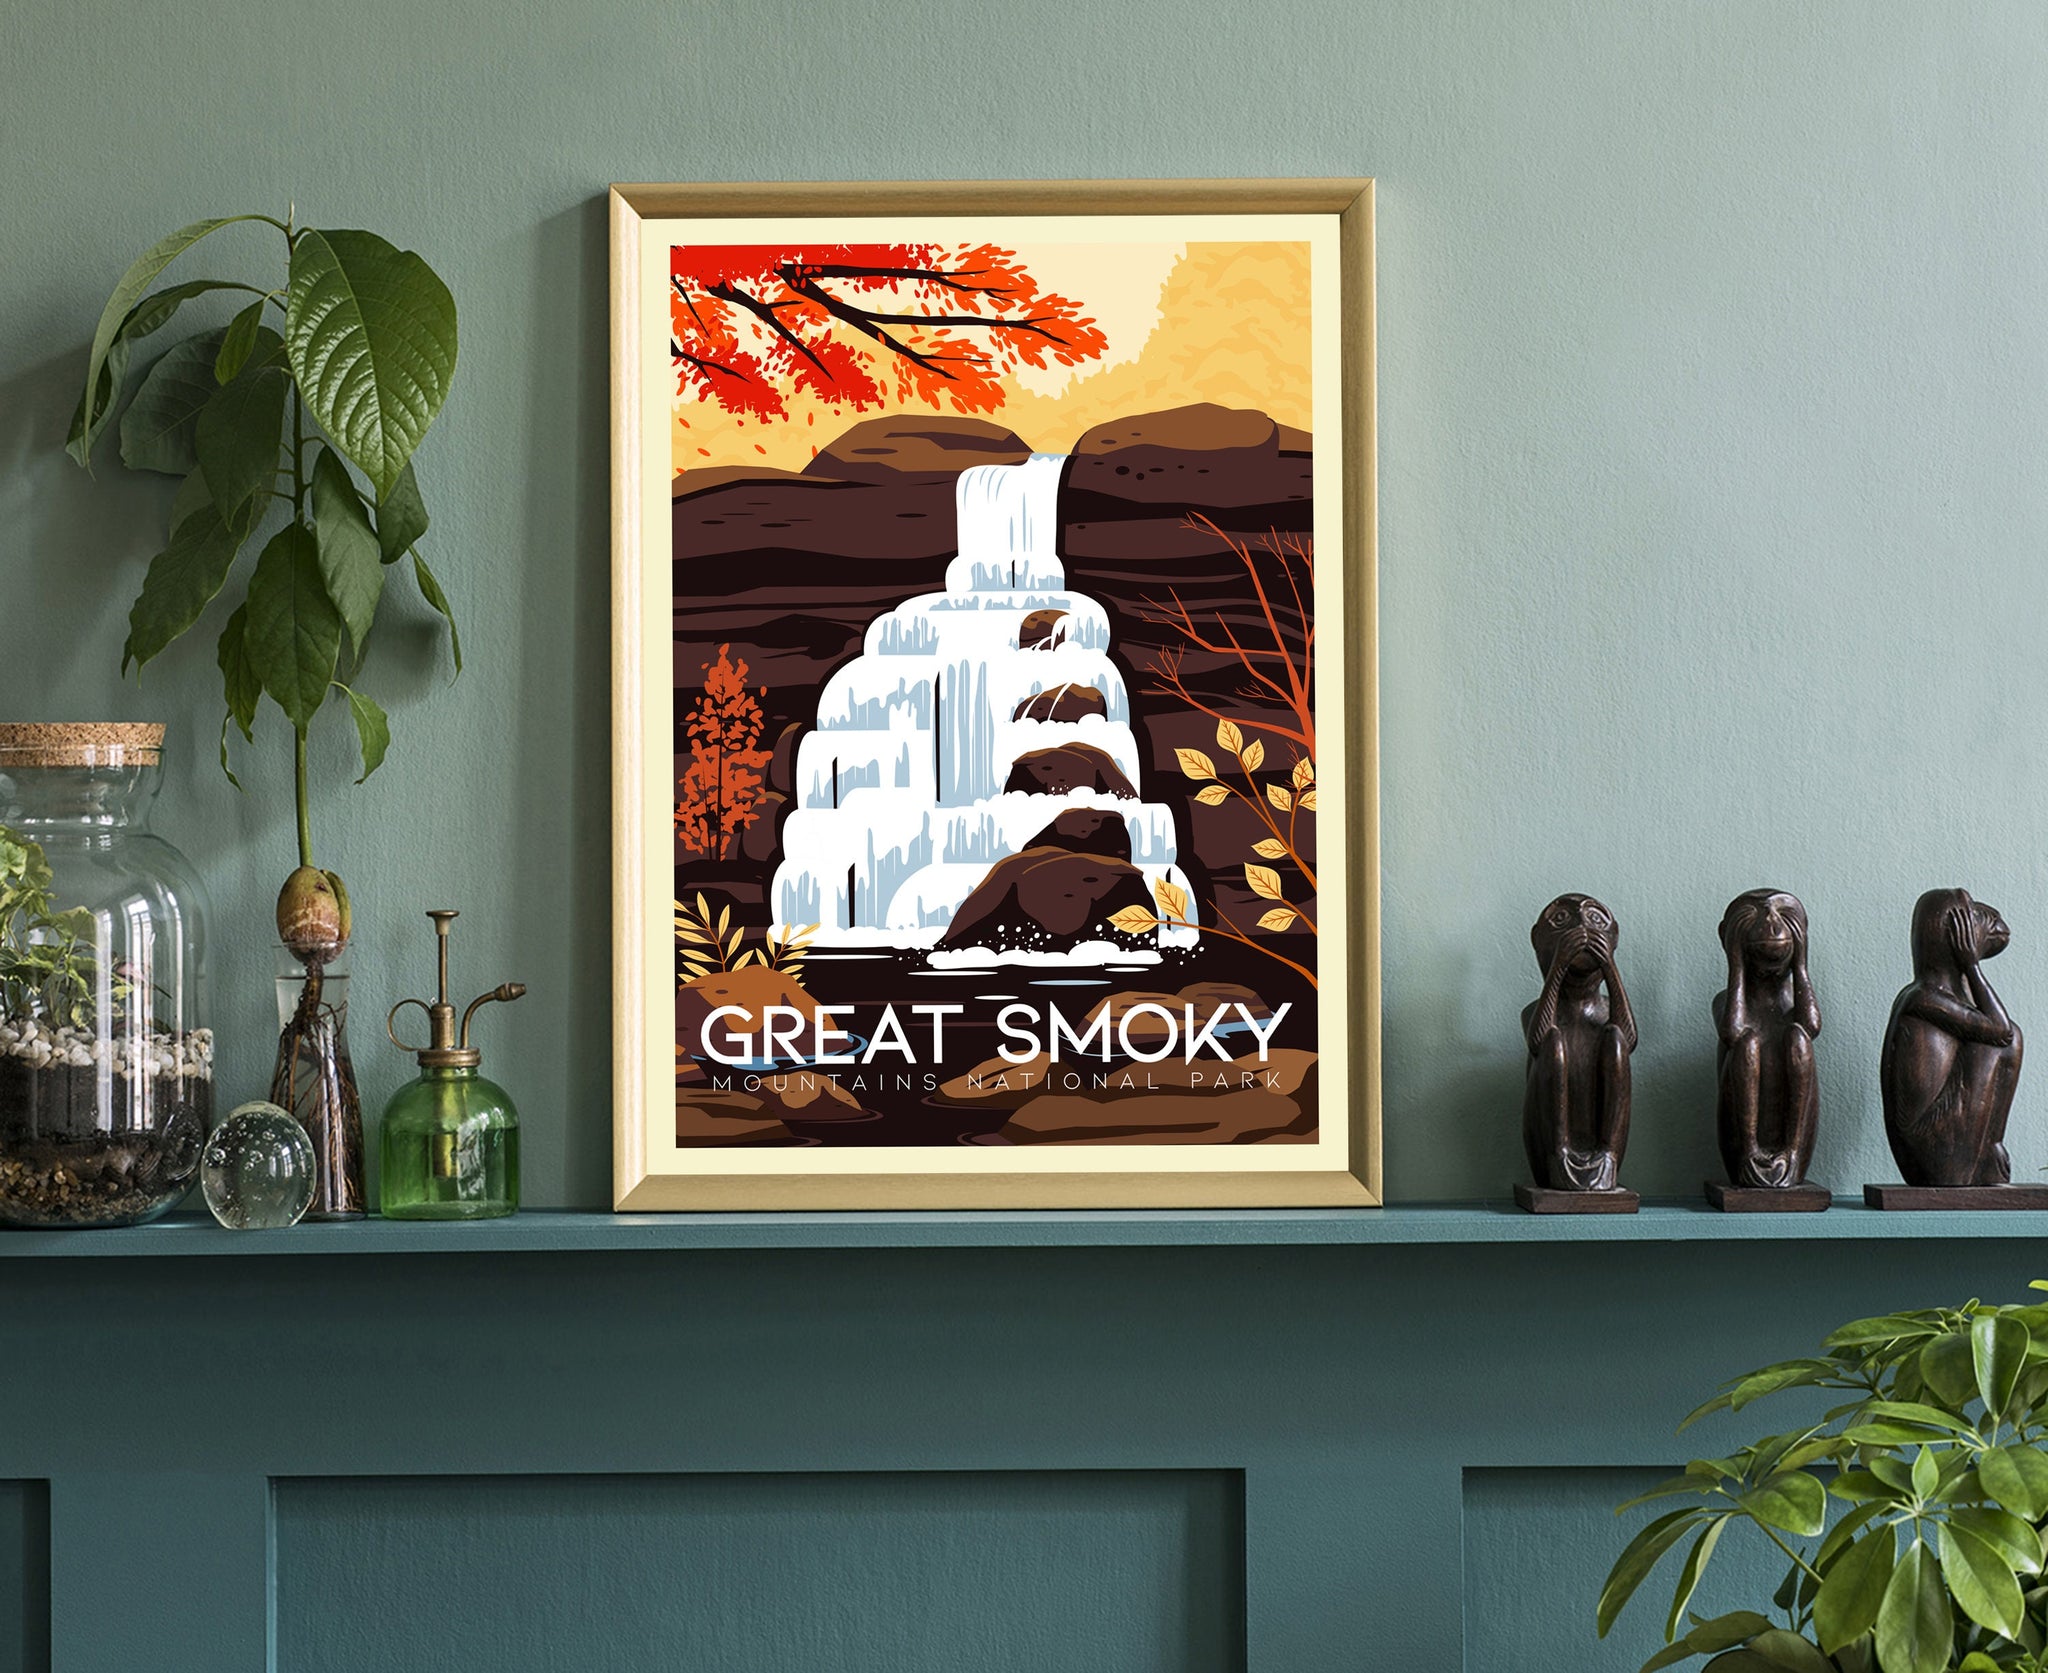 Great Smoky Mountains, Travel Poster Print, Retro Travel Poster, Mountain range in the United States of America, Housewarming Gift